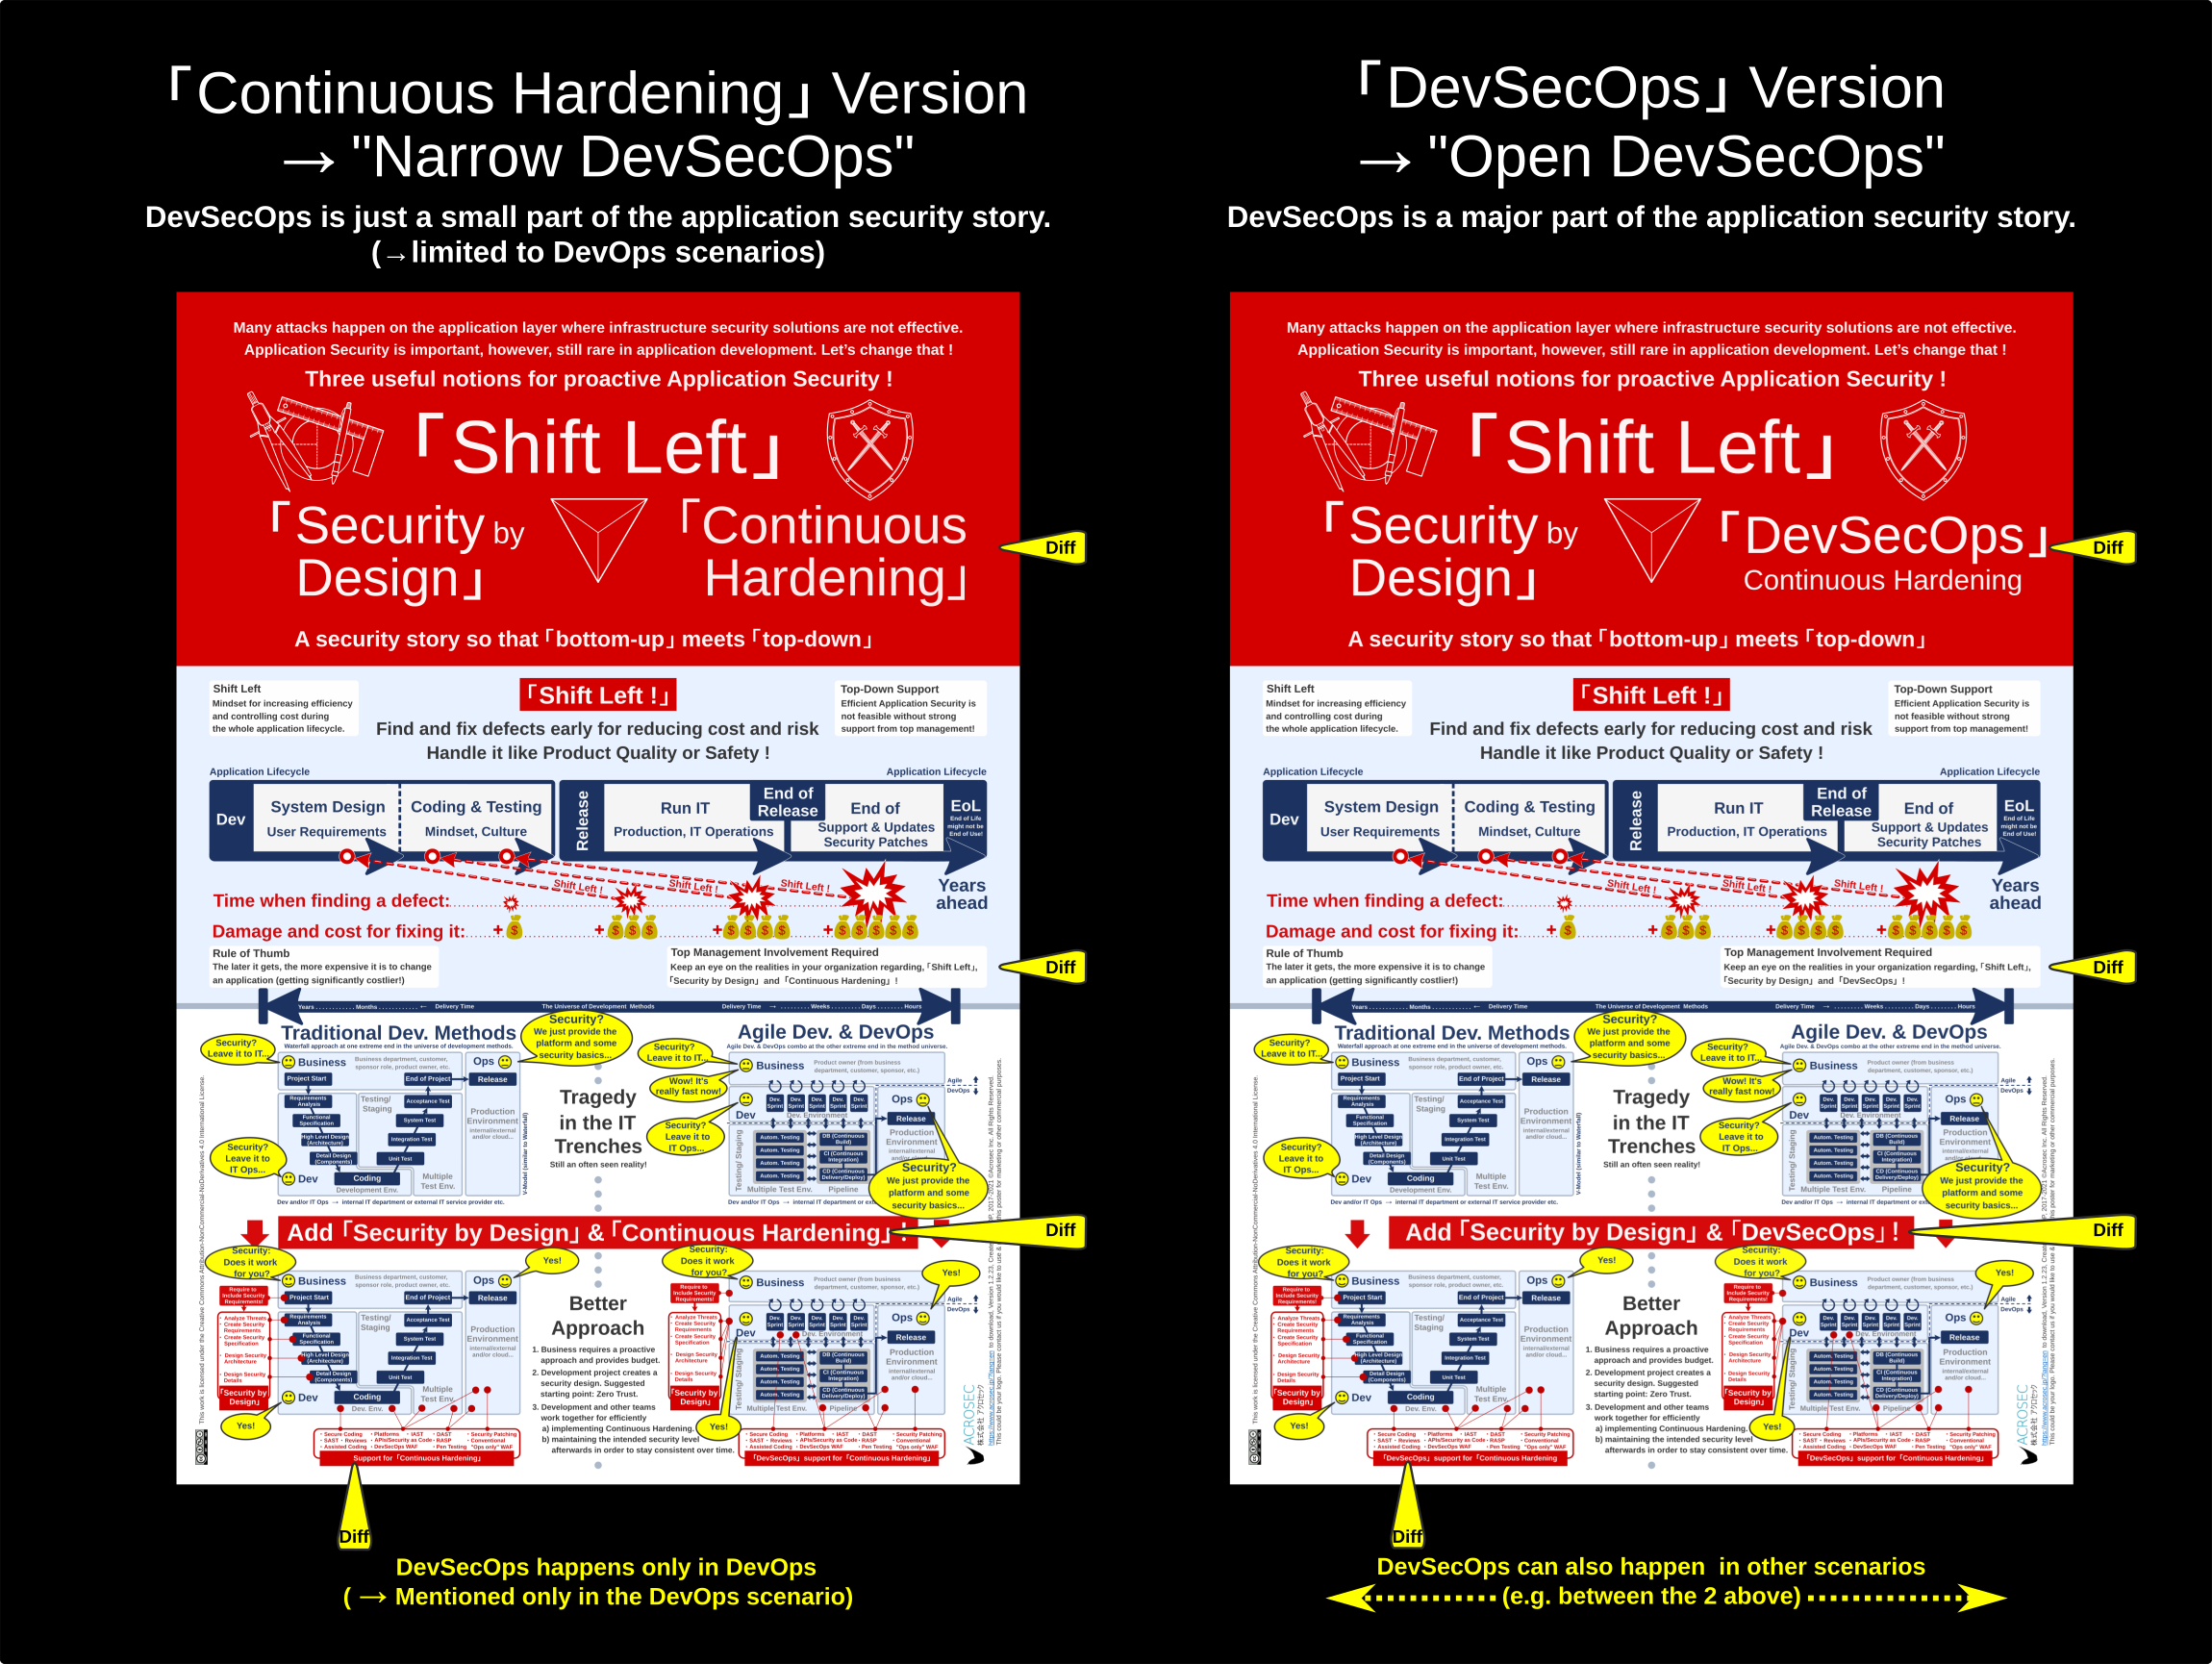 Shift-Left, Security by Design and DevSecOps and Continuous Hardening